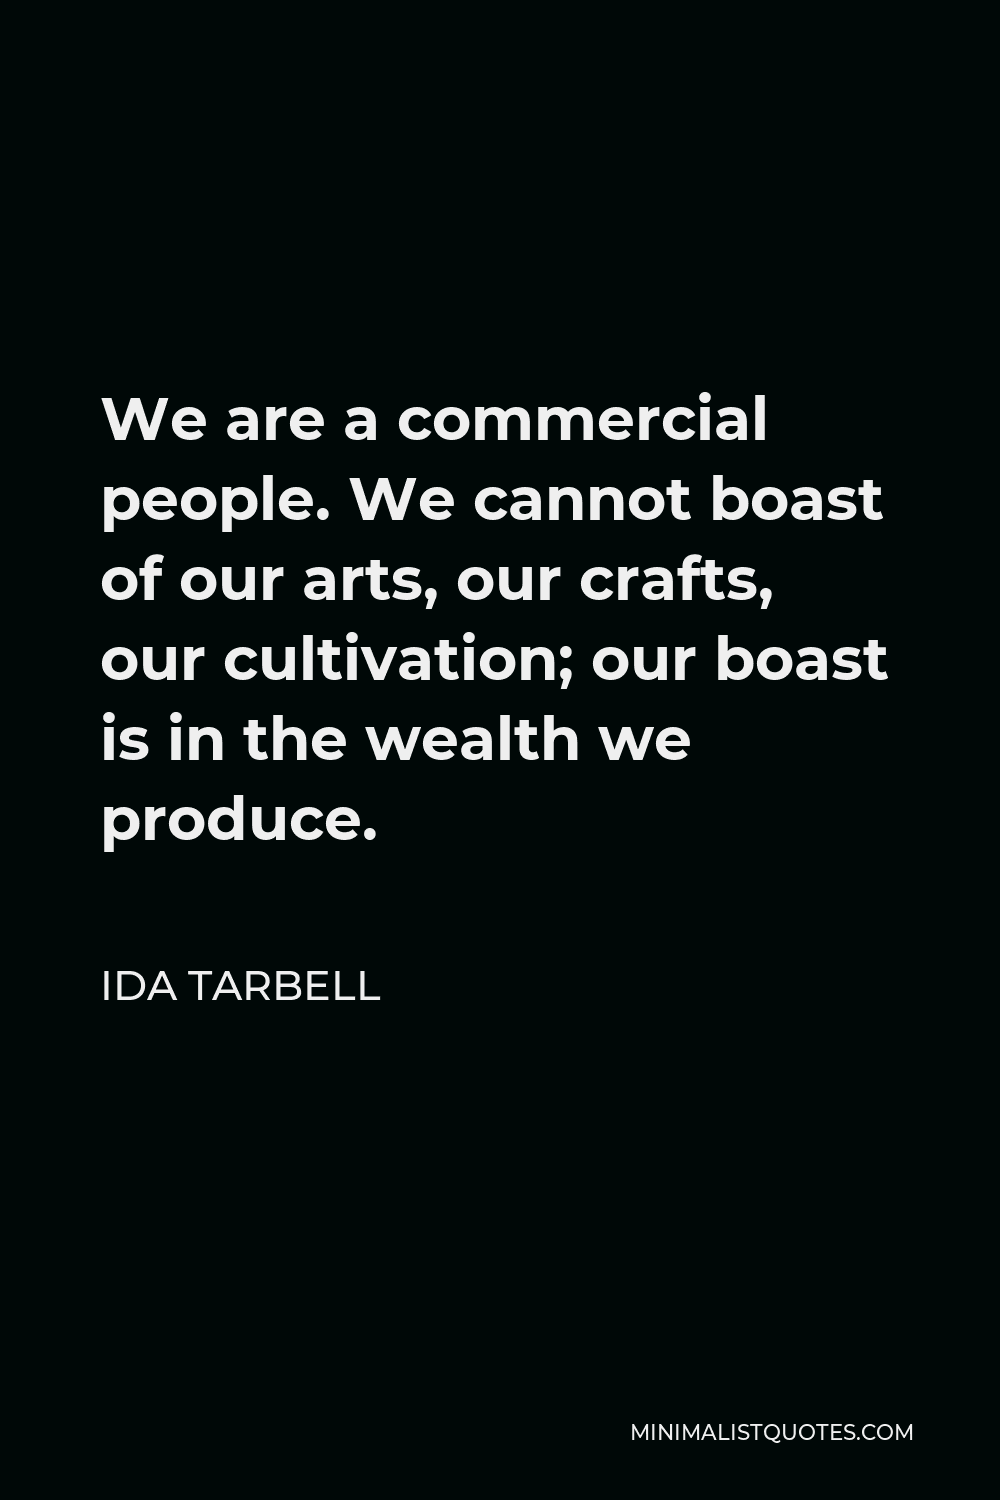 Ida Tarbell Quote - We are a commercial people. We cannot boast of our arts, our crafts, our cultivation; our boast is in the wealth we produce.